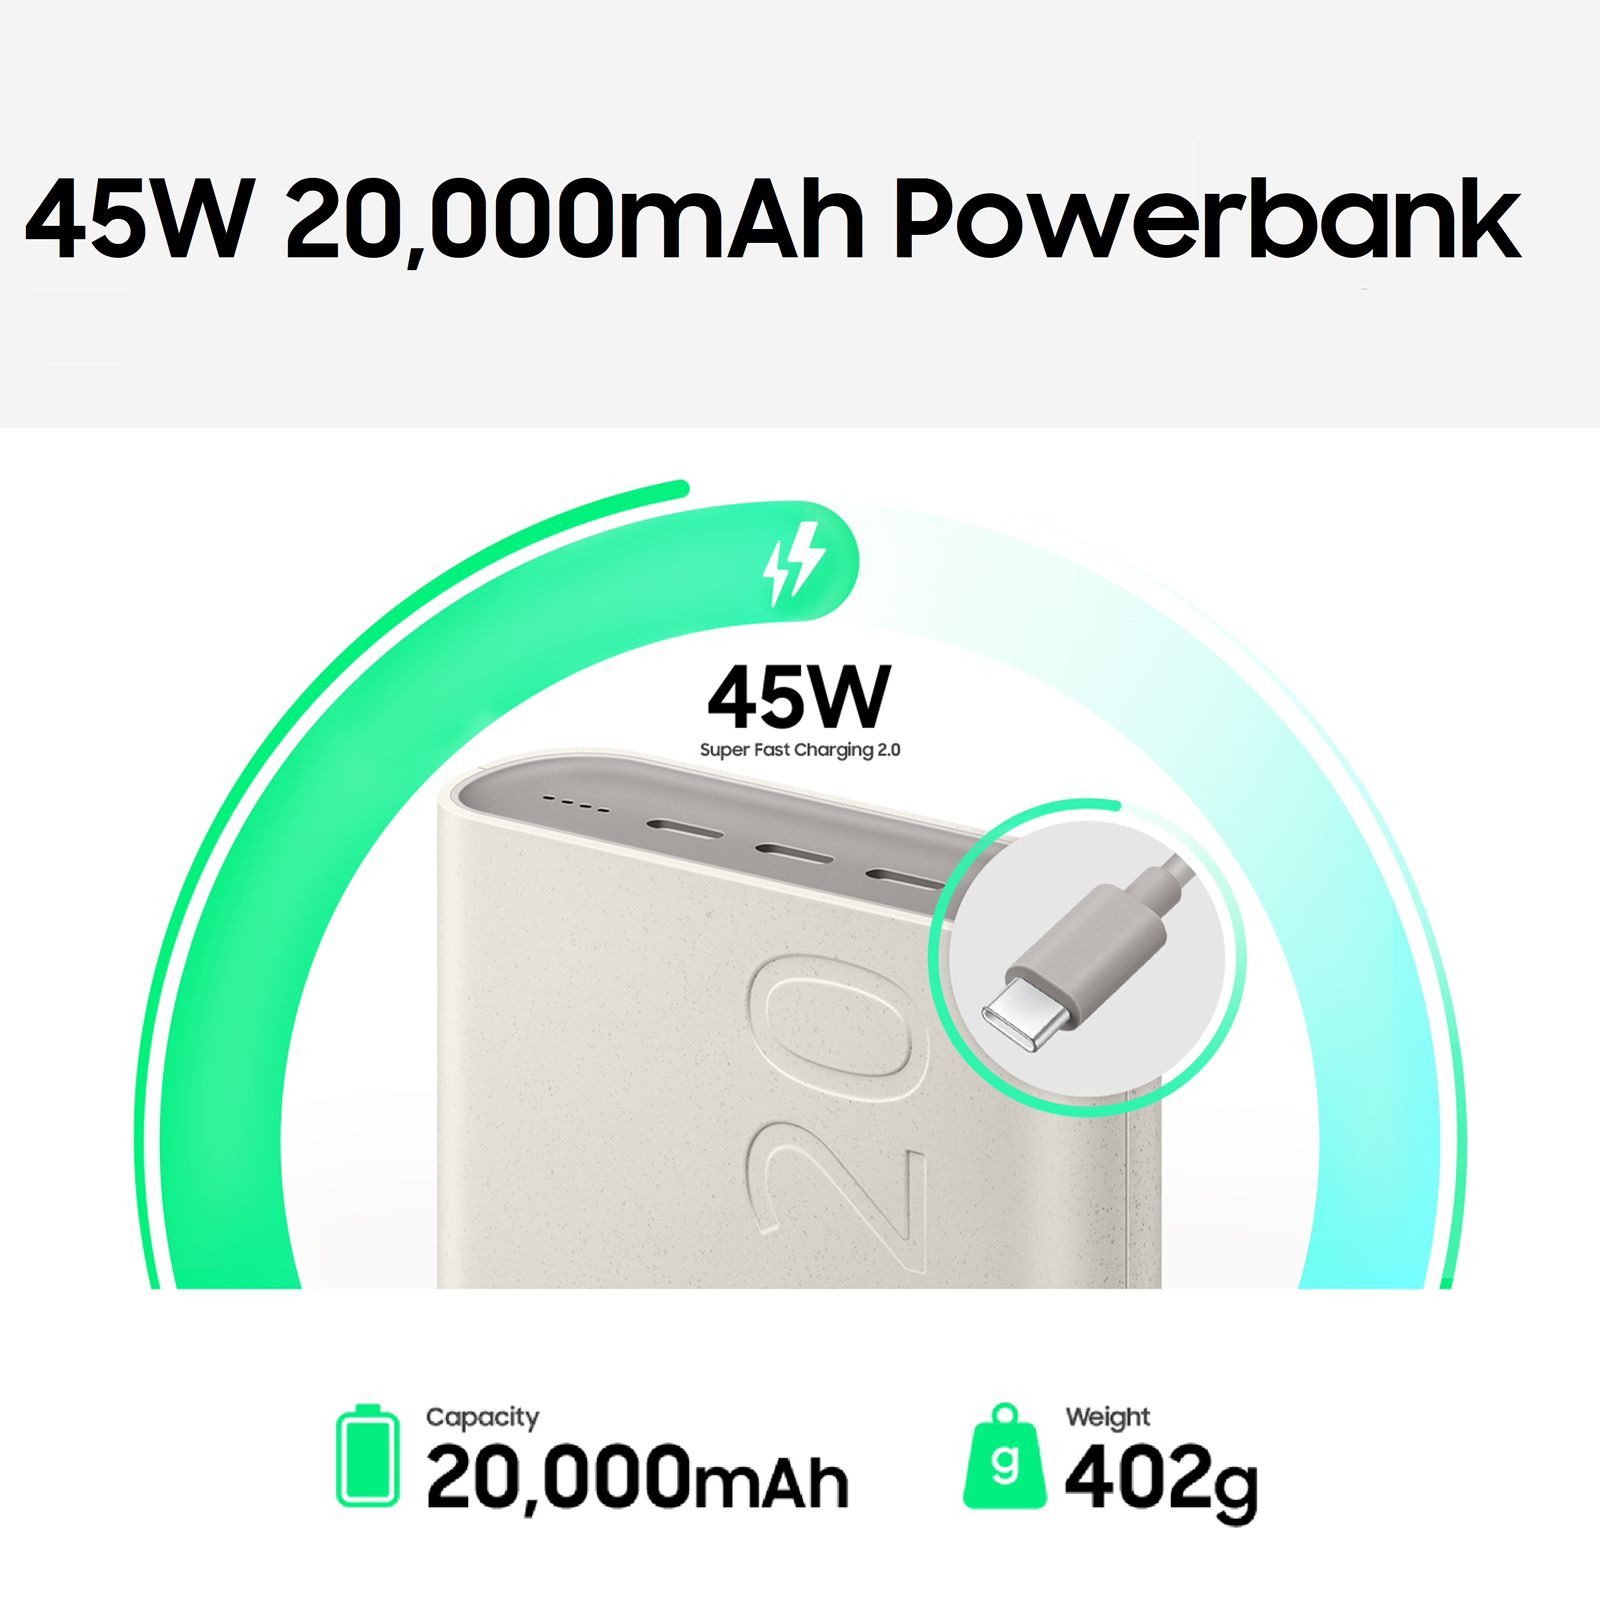 * Samsung has unveiled 10,000mAh and 20,000mAh power banks in India